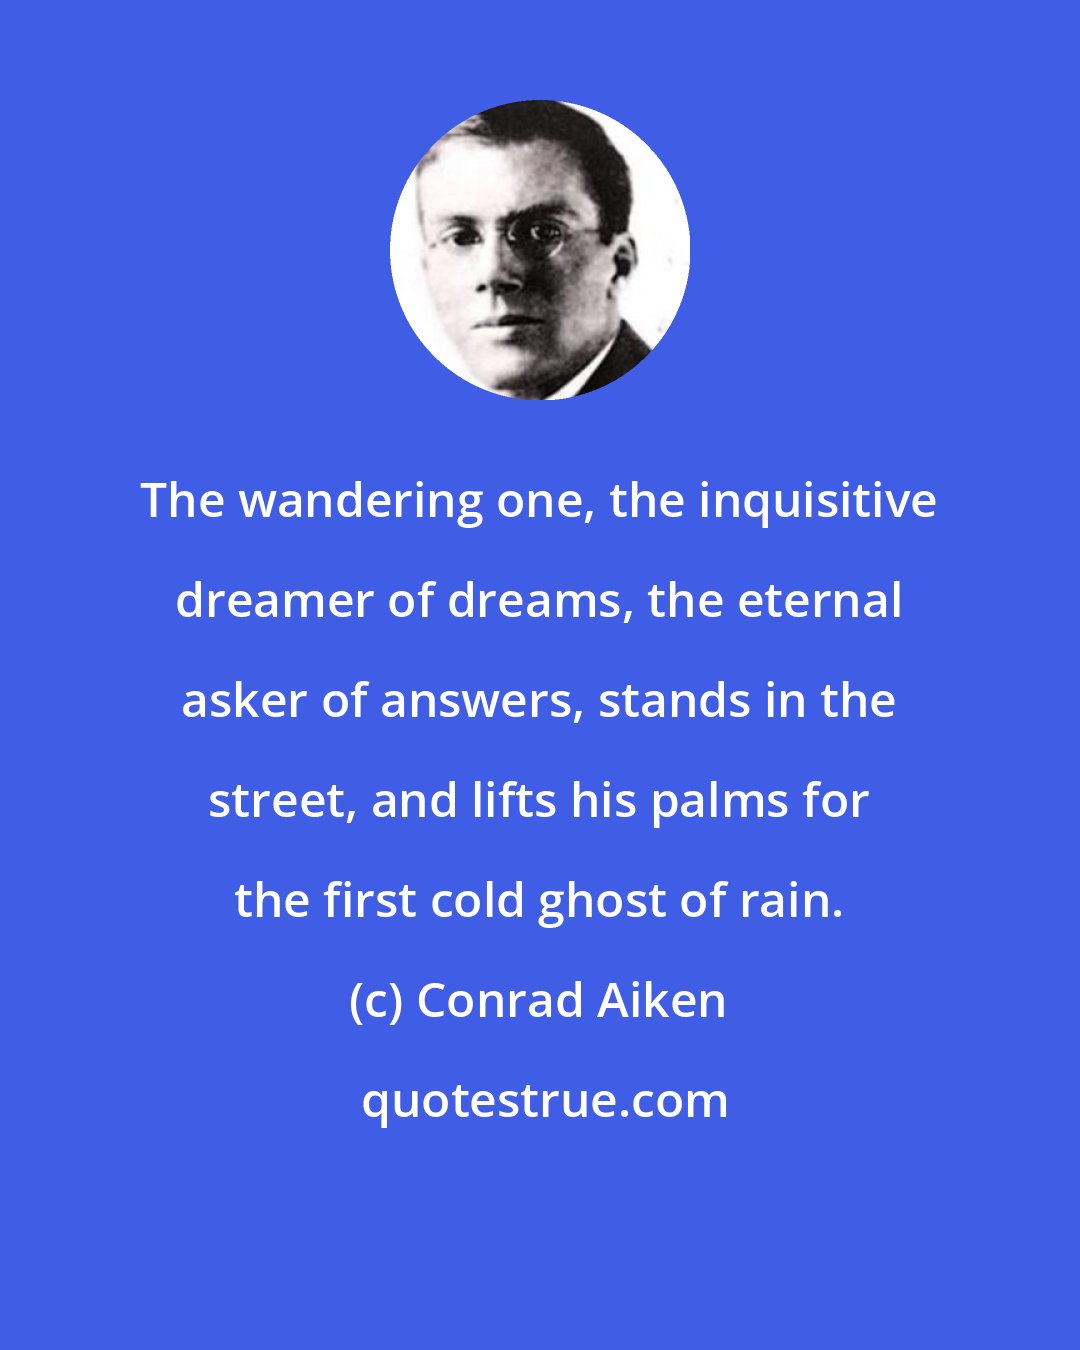 Conrad Aiken: The wandering one, the inquisitive dreamer of dreams, the eternal asker of answers, stands in the street, and lifts his palms for the first cold ghost of rain.